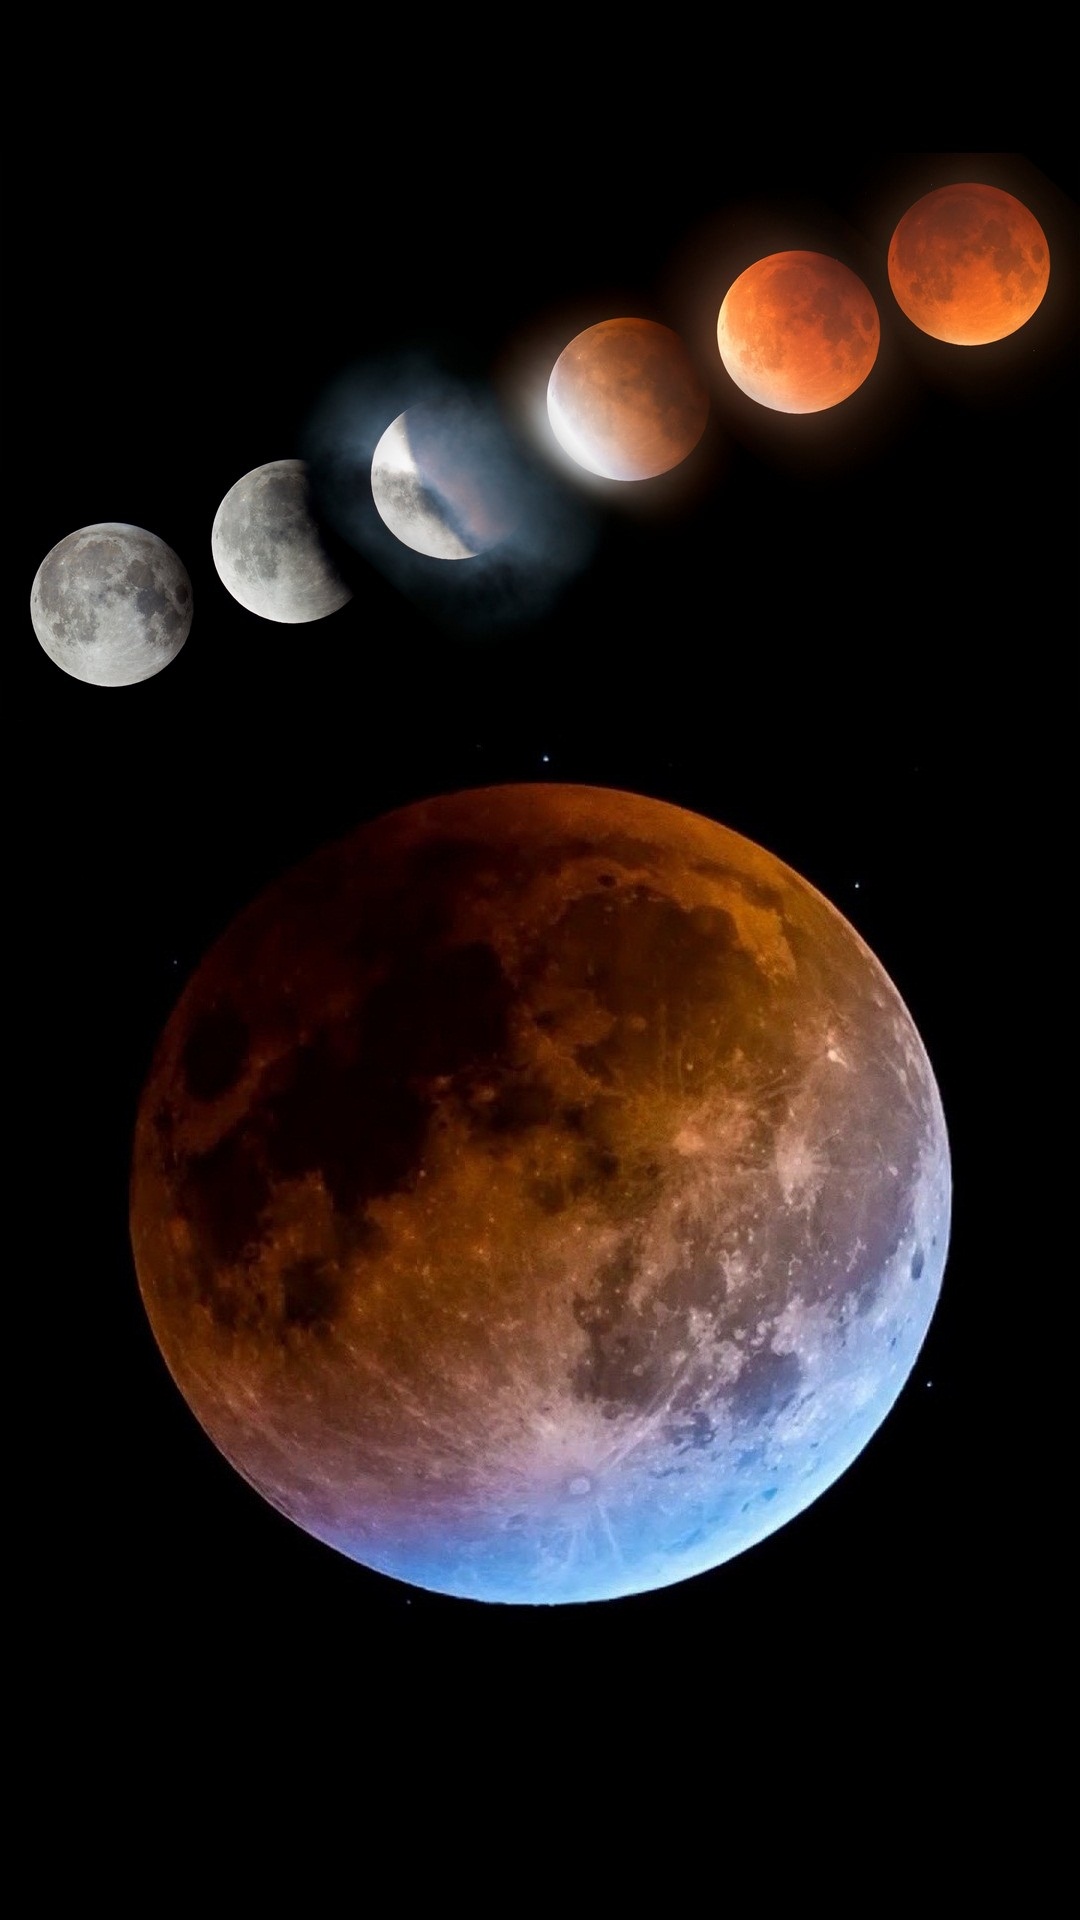 Blood Moon Lunar Eclipse Android Wallpaper with HD resolution 1080x1920